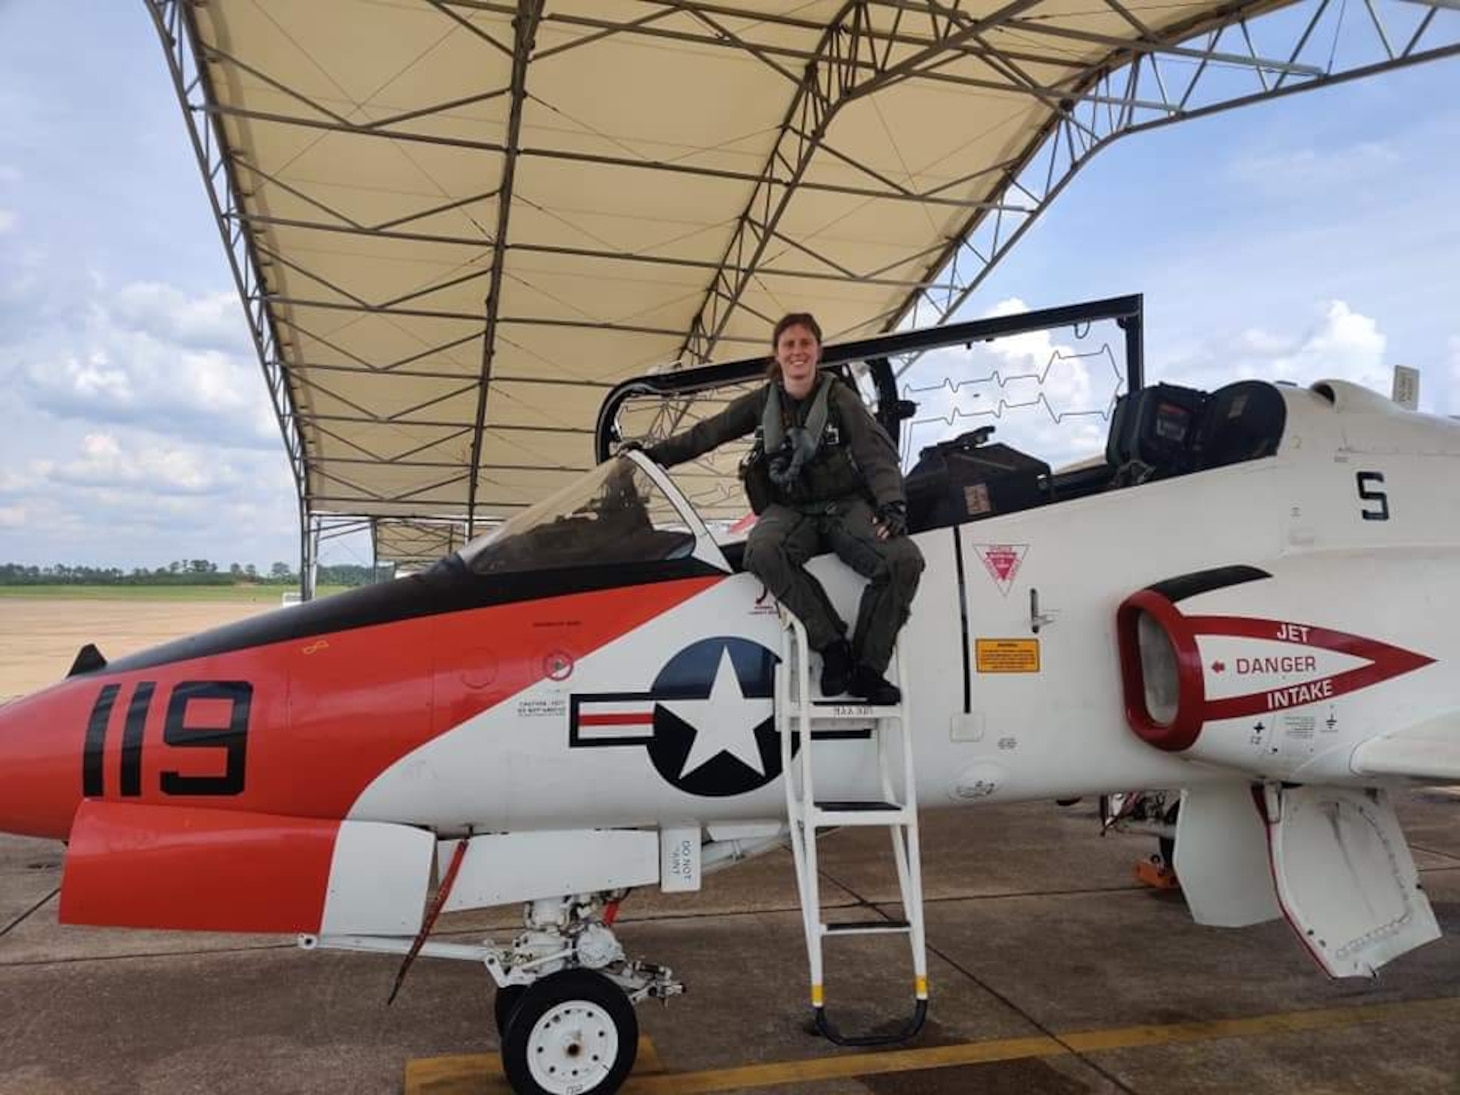 MERIDIAN, Miss. (June 2, 2020) Italian navy Ensign Erika Raballo, a student naval aviator, sits on a T-45C Goshawk jet trainer aircraft after completing her a training flight with the "Tigers" of Training Squadron (VT) 9 at Naval Air Station Meridian, June 2, 2020.